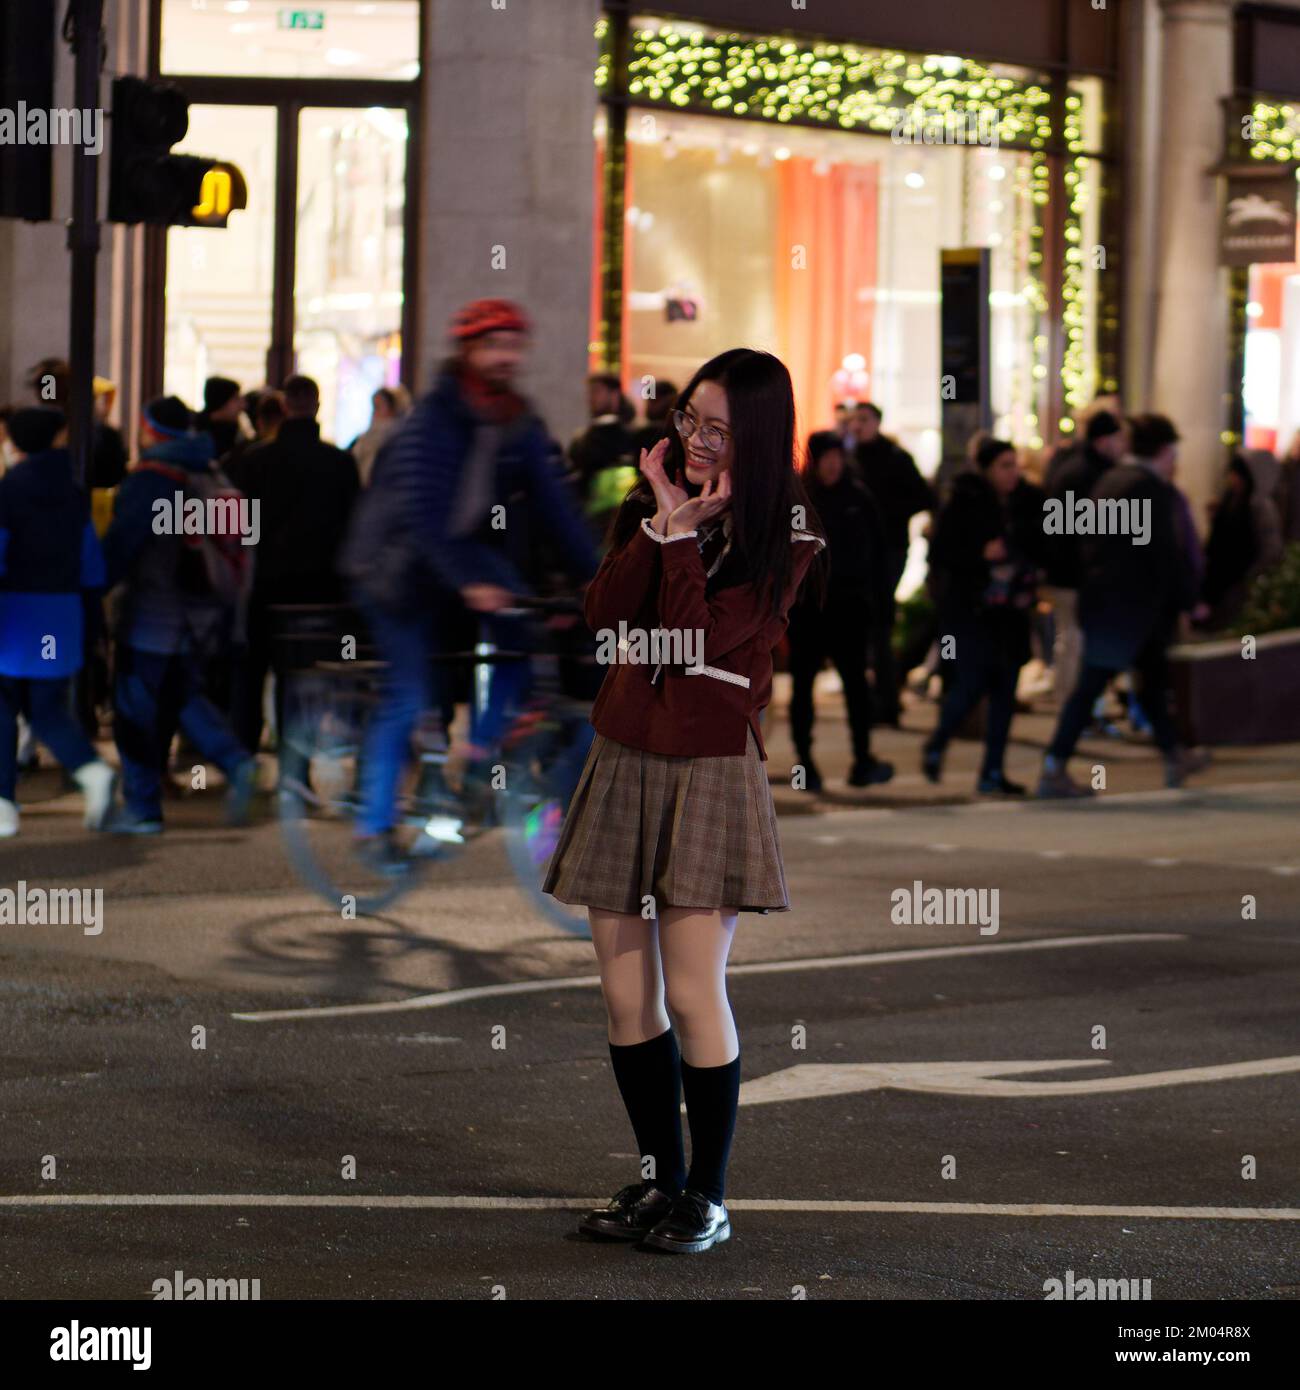 Spectacled asian Tourist poses and smiles for a photo on Regent Street wearing a mini skirt at night in winter. Stock Photo